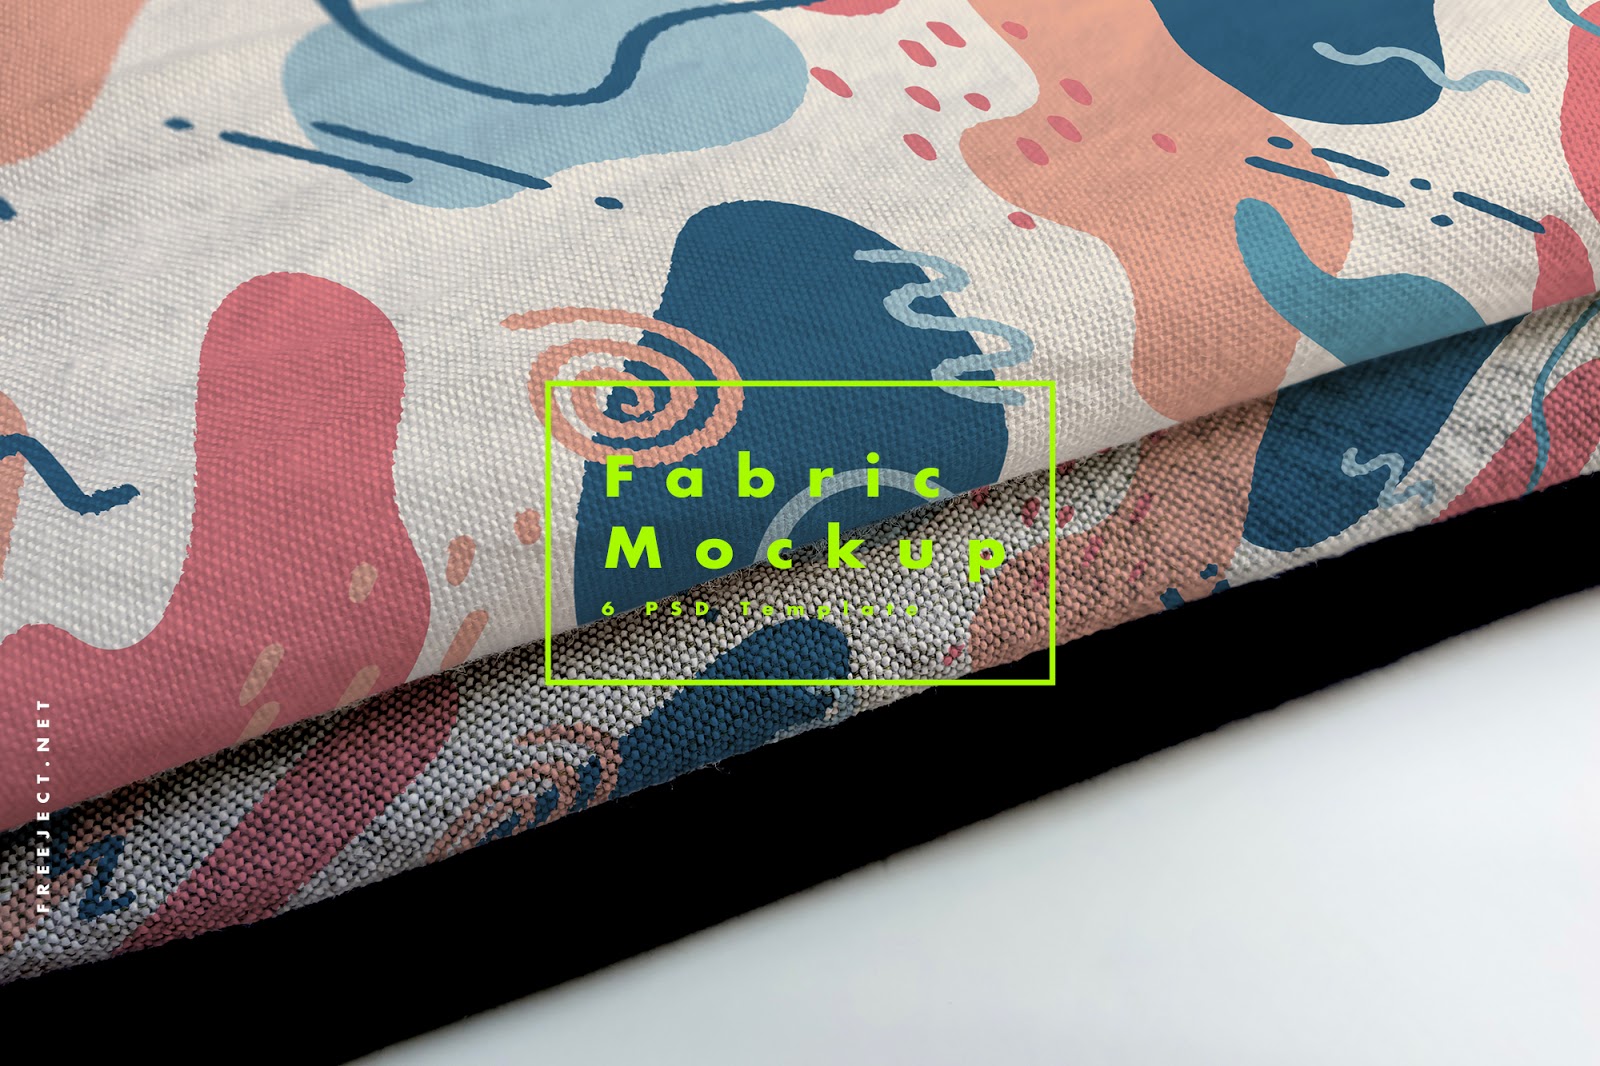 Download Free 5852+ Fabric Mockup Psd Free Yellowimages Mockups these mockups if you need to present your logo and other branding projects.